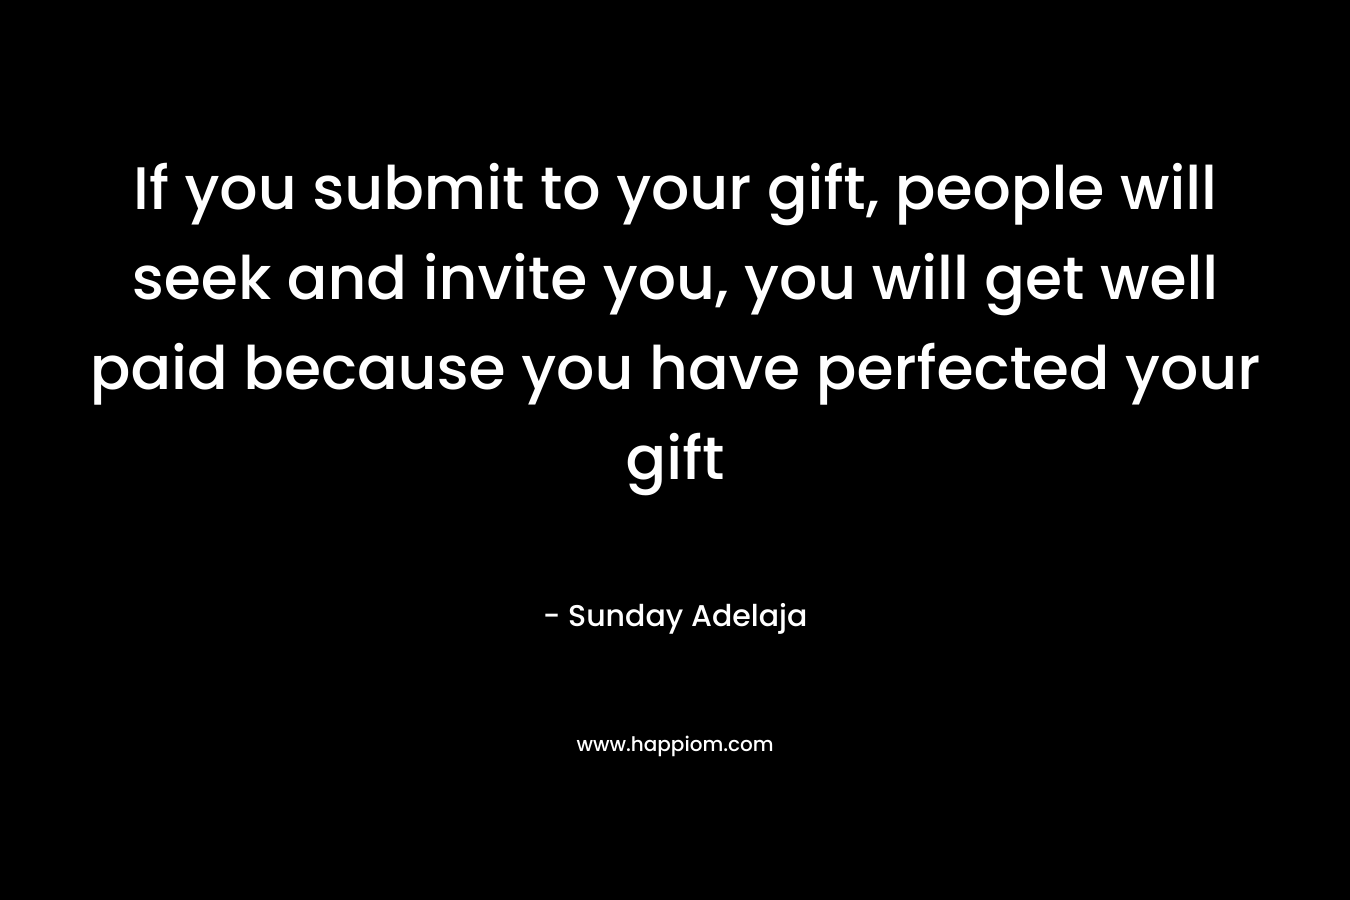 If you submit to your gift, people will seek and invite you, you will get well paid because you have perfected your gift